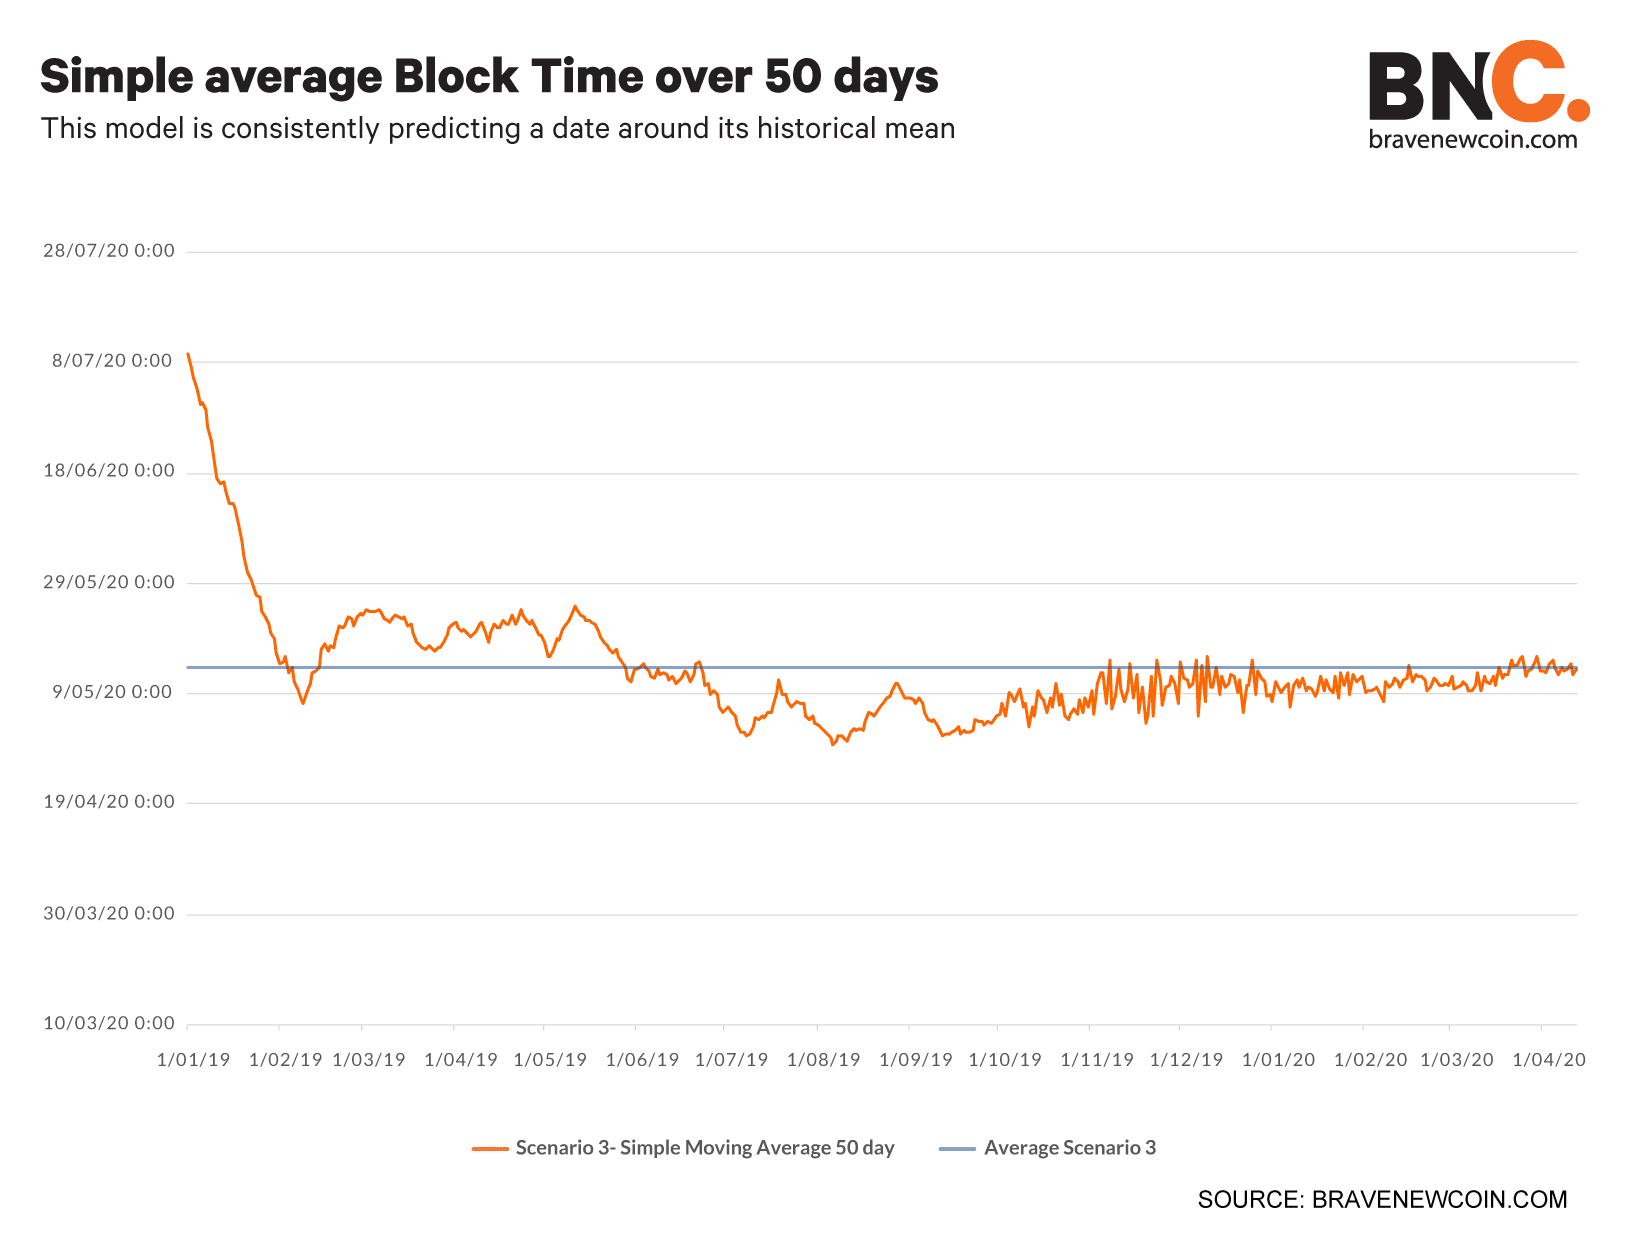 Simple-average-block-time-over-50-days (7)